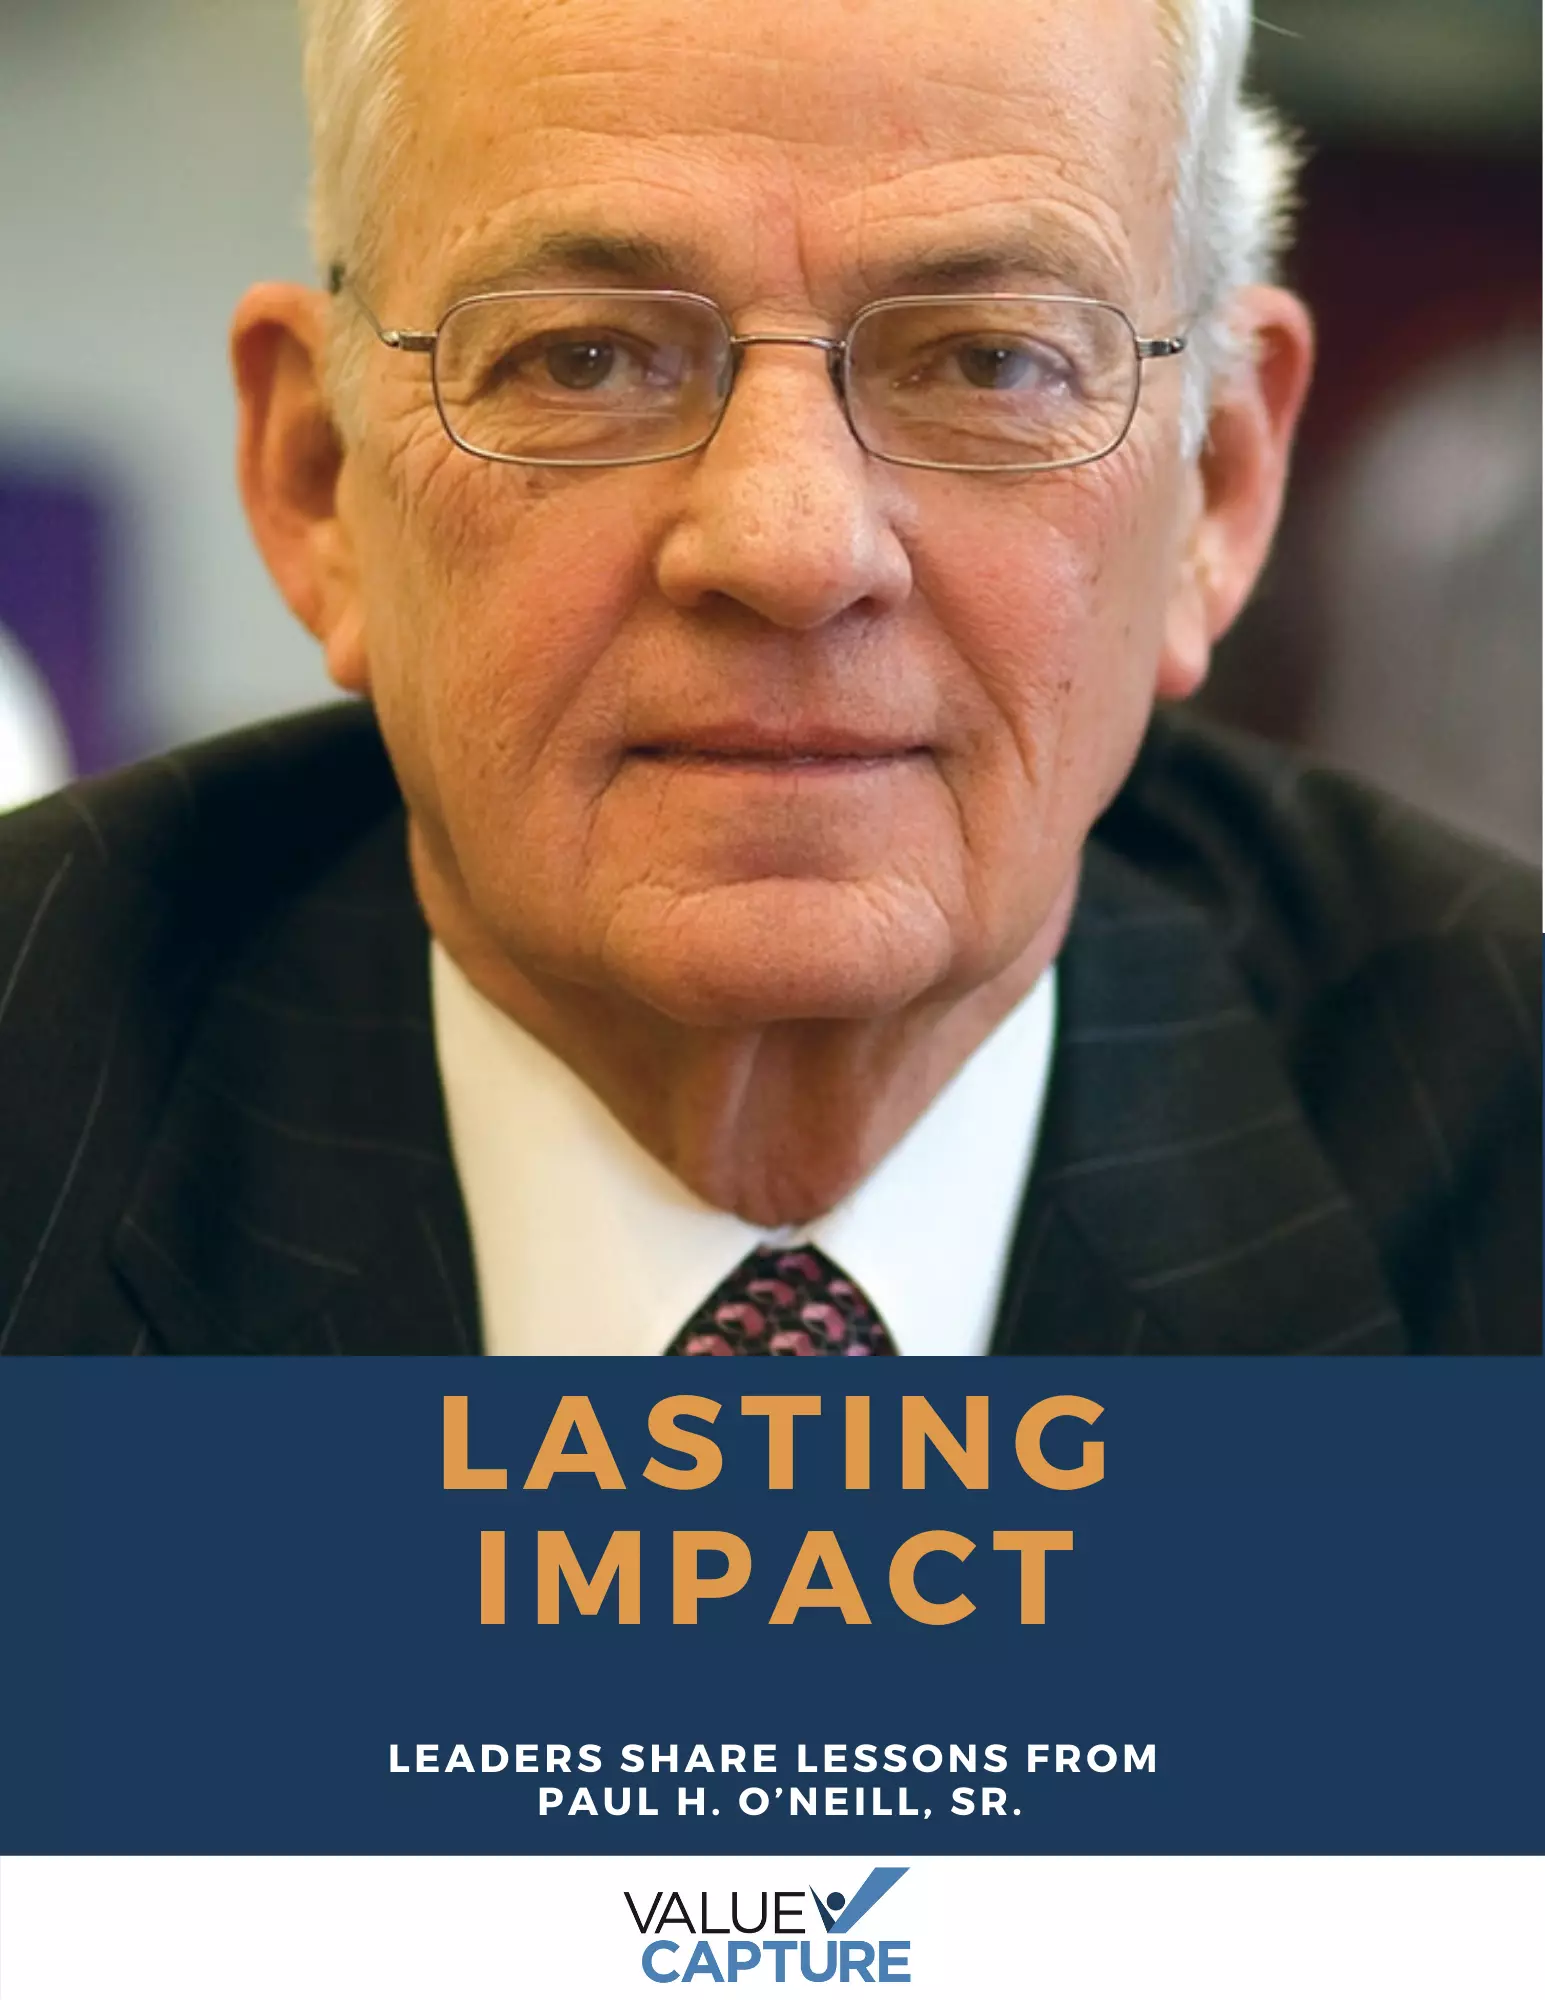 Lasting Impact Book Cover Paul ONeill Value Capture